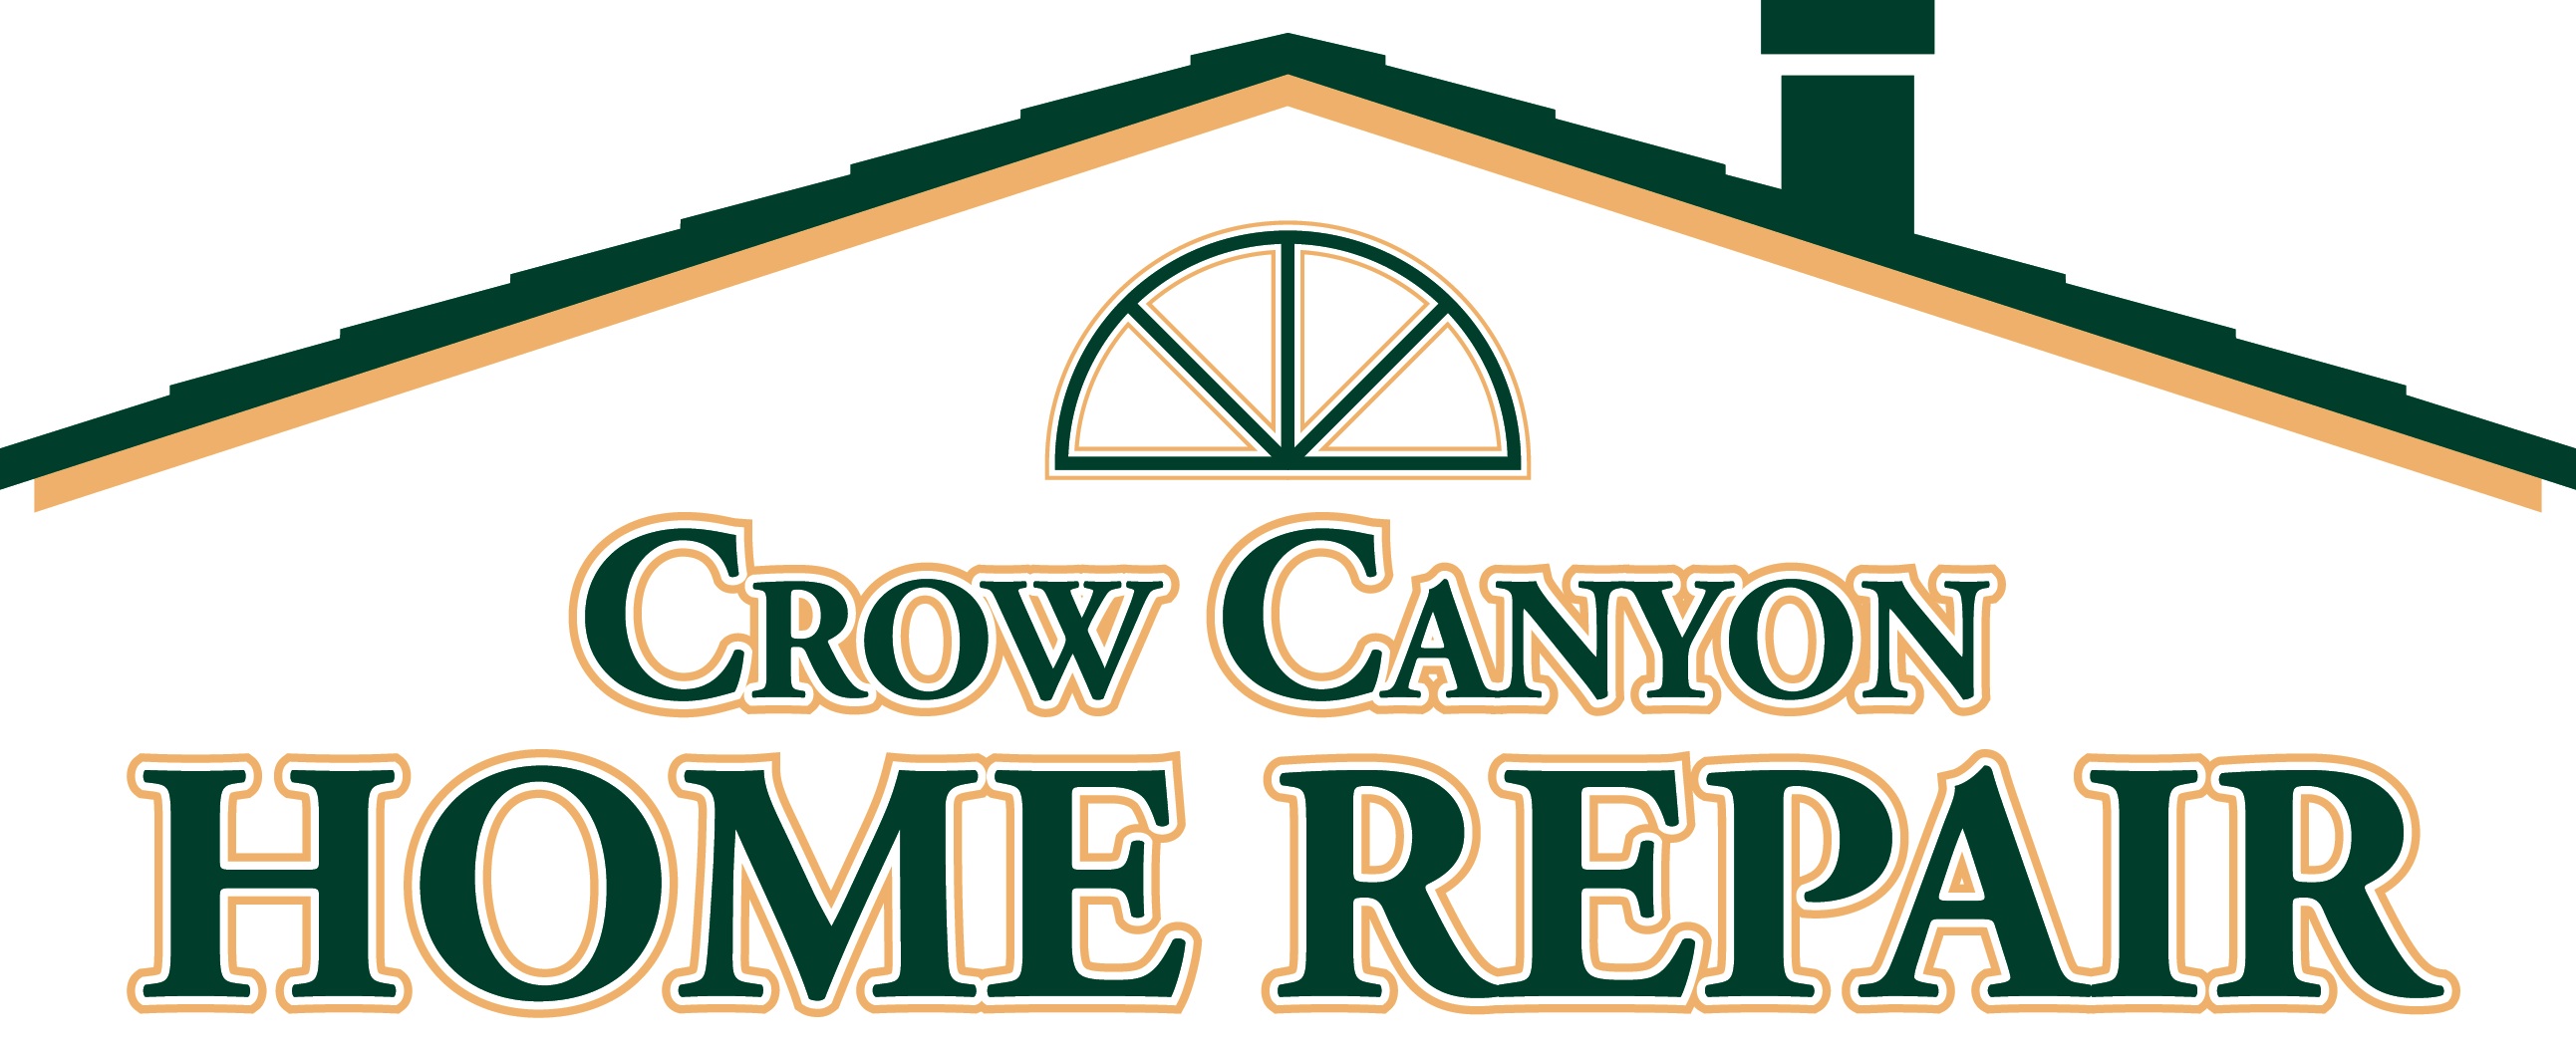 Crow Canyon Home Repair & Remodeling - Home